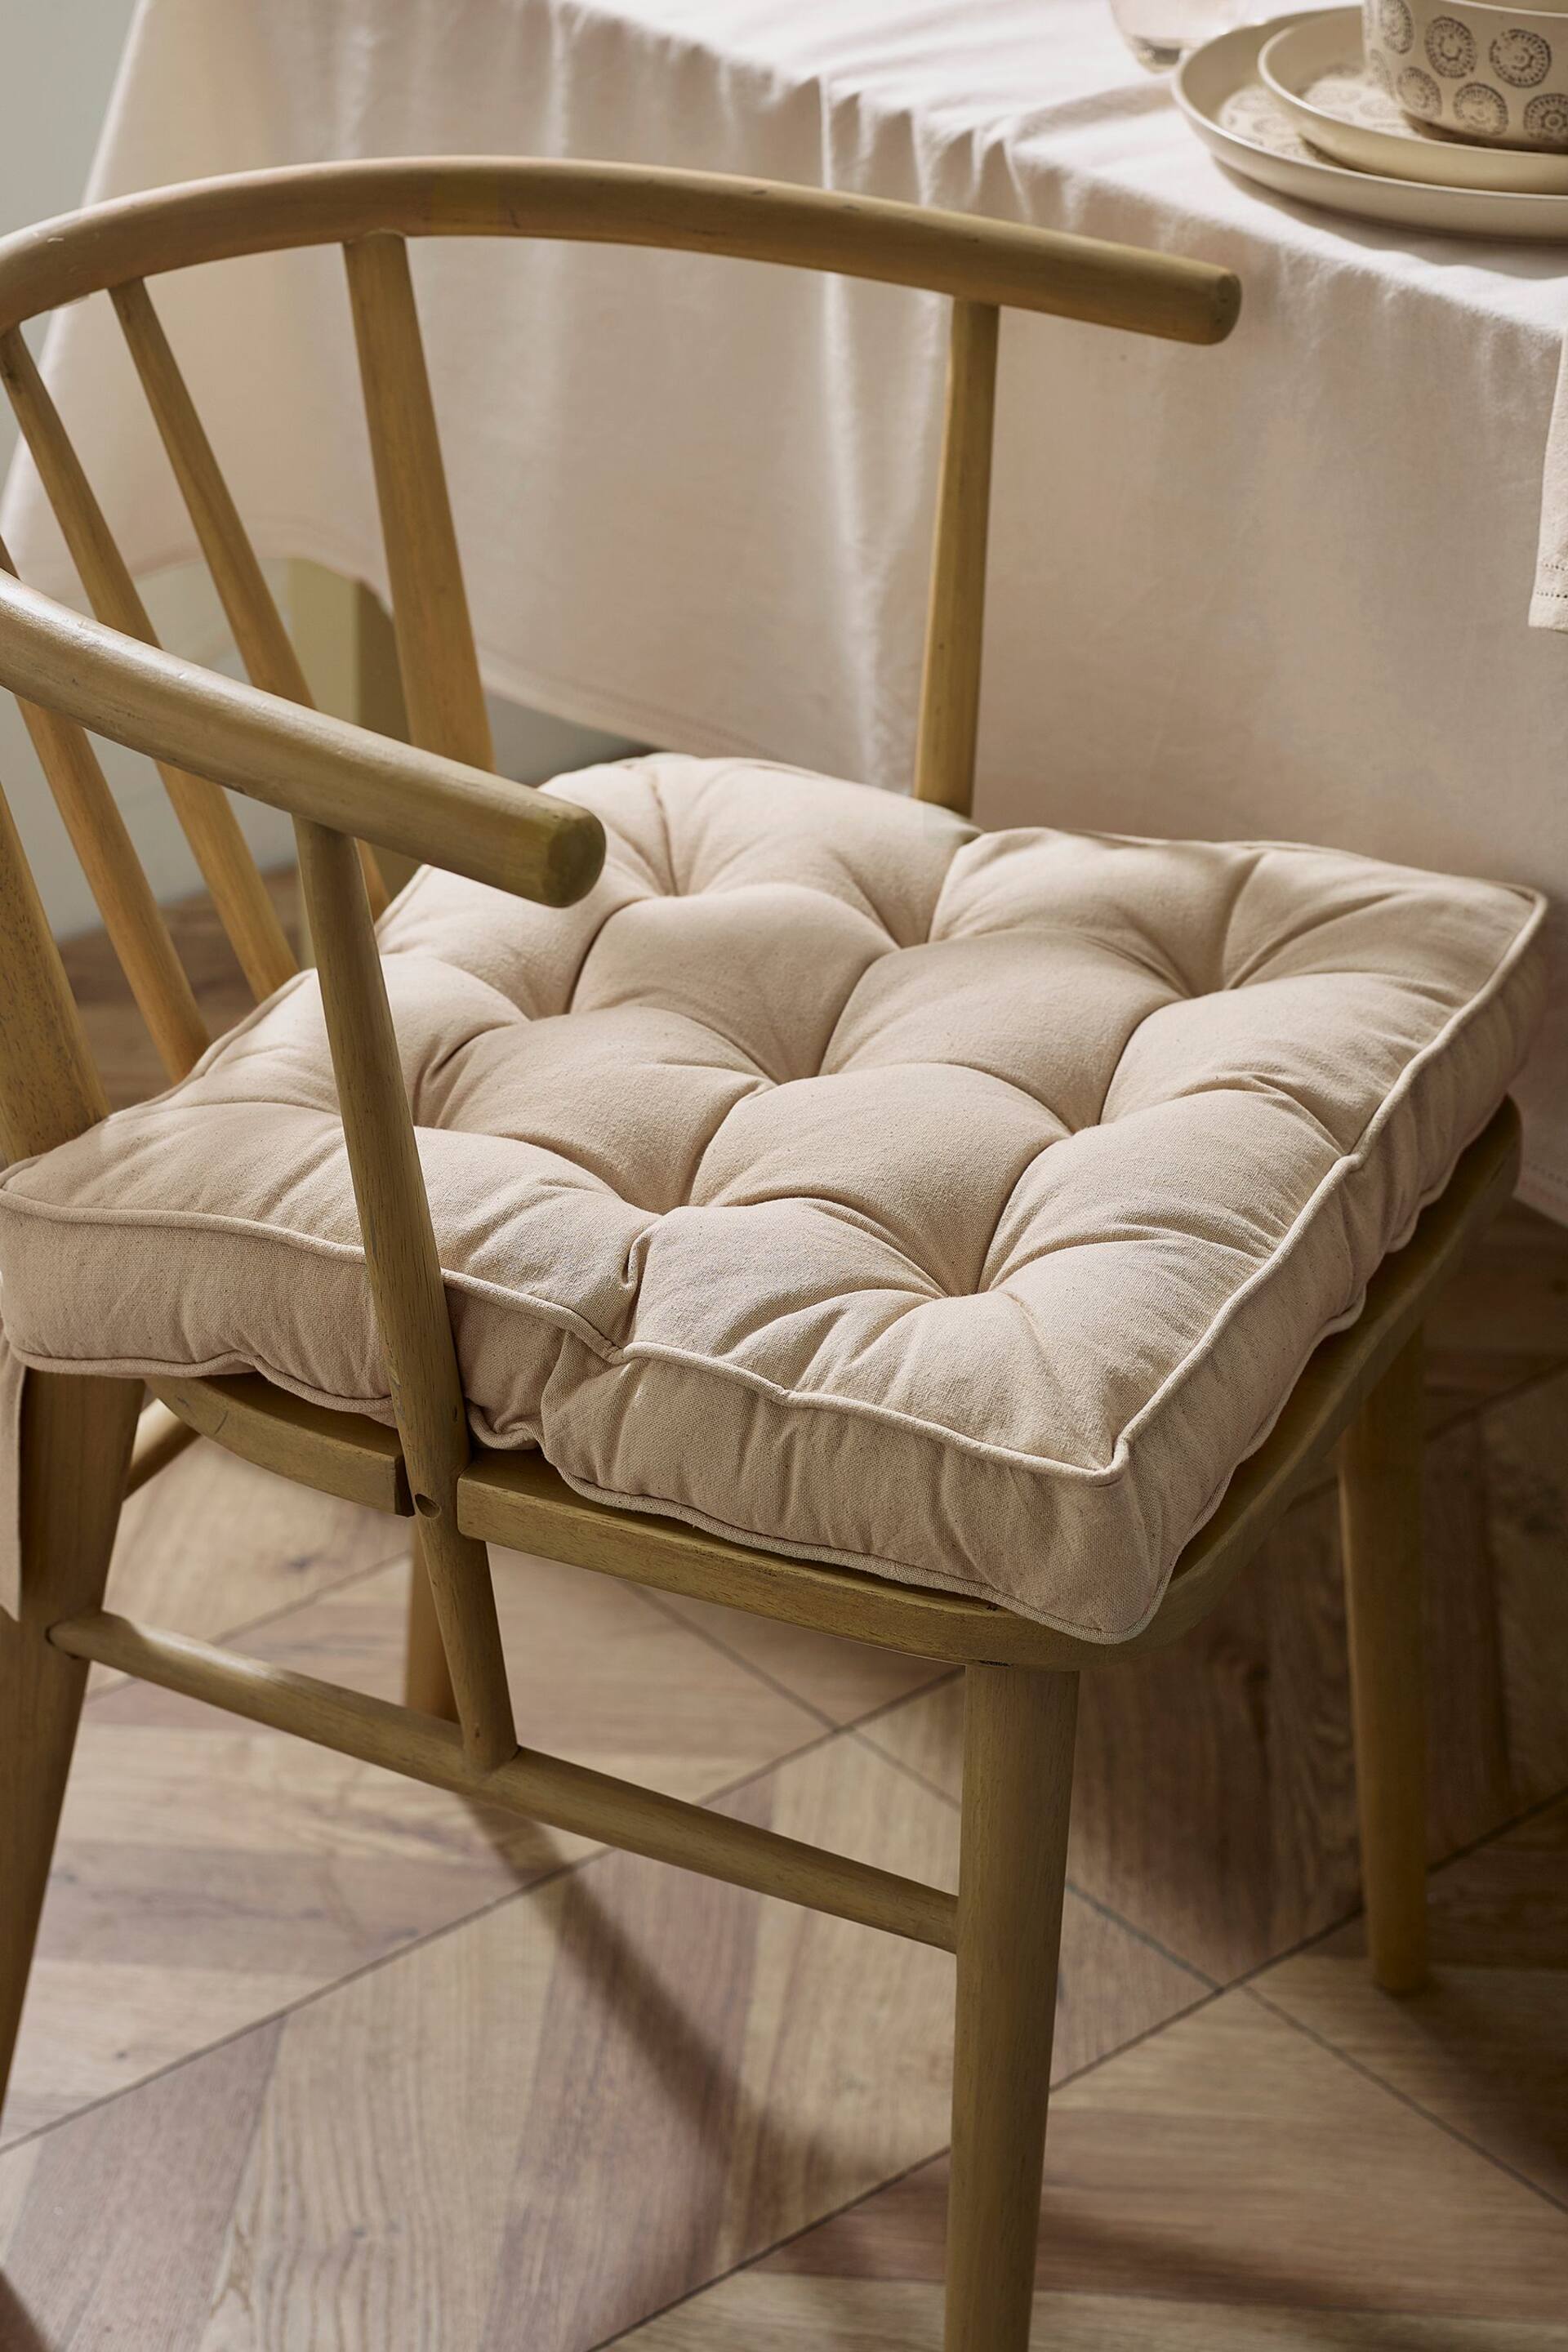 Natural Linen-Look Padded Cotton Seat Pad - Image 1 of 4